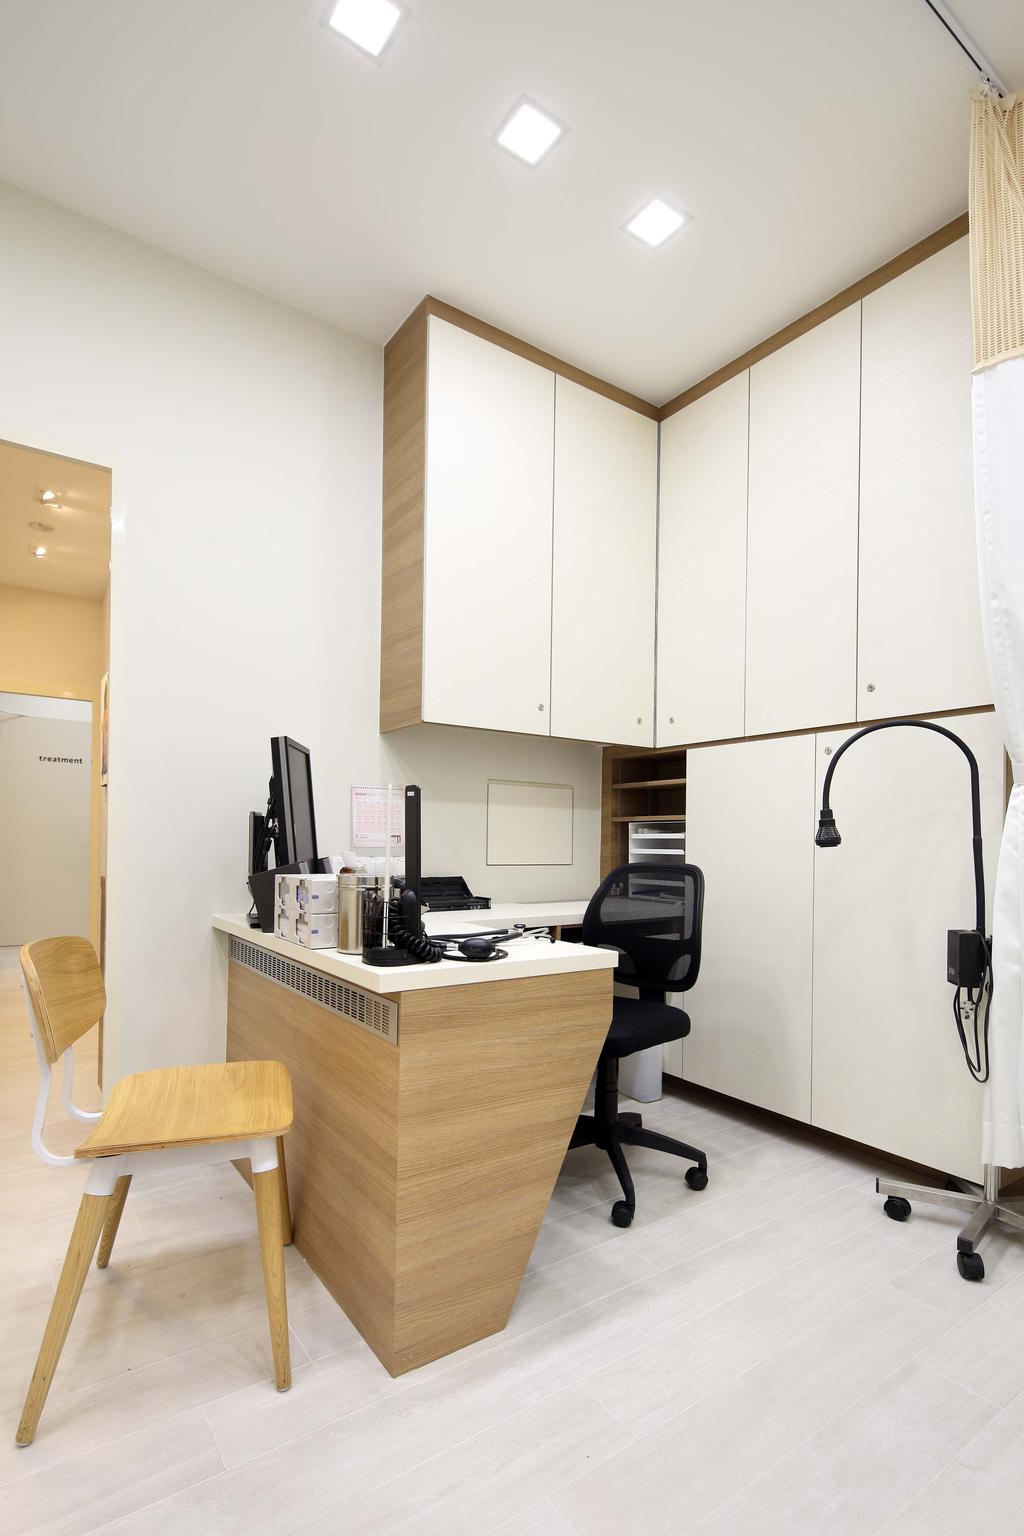 Marine Parade Central - Clinic, Commercial, Interior Designer, Space Define Interior, Scandinavian, White, White Kitchen Cabinets, Wood Laminate, Laminate Flooring, Storage Cabinet, Wooden Chair, Office Chair, Recessed Lights, Plywood, Wood